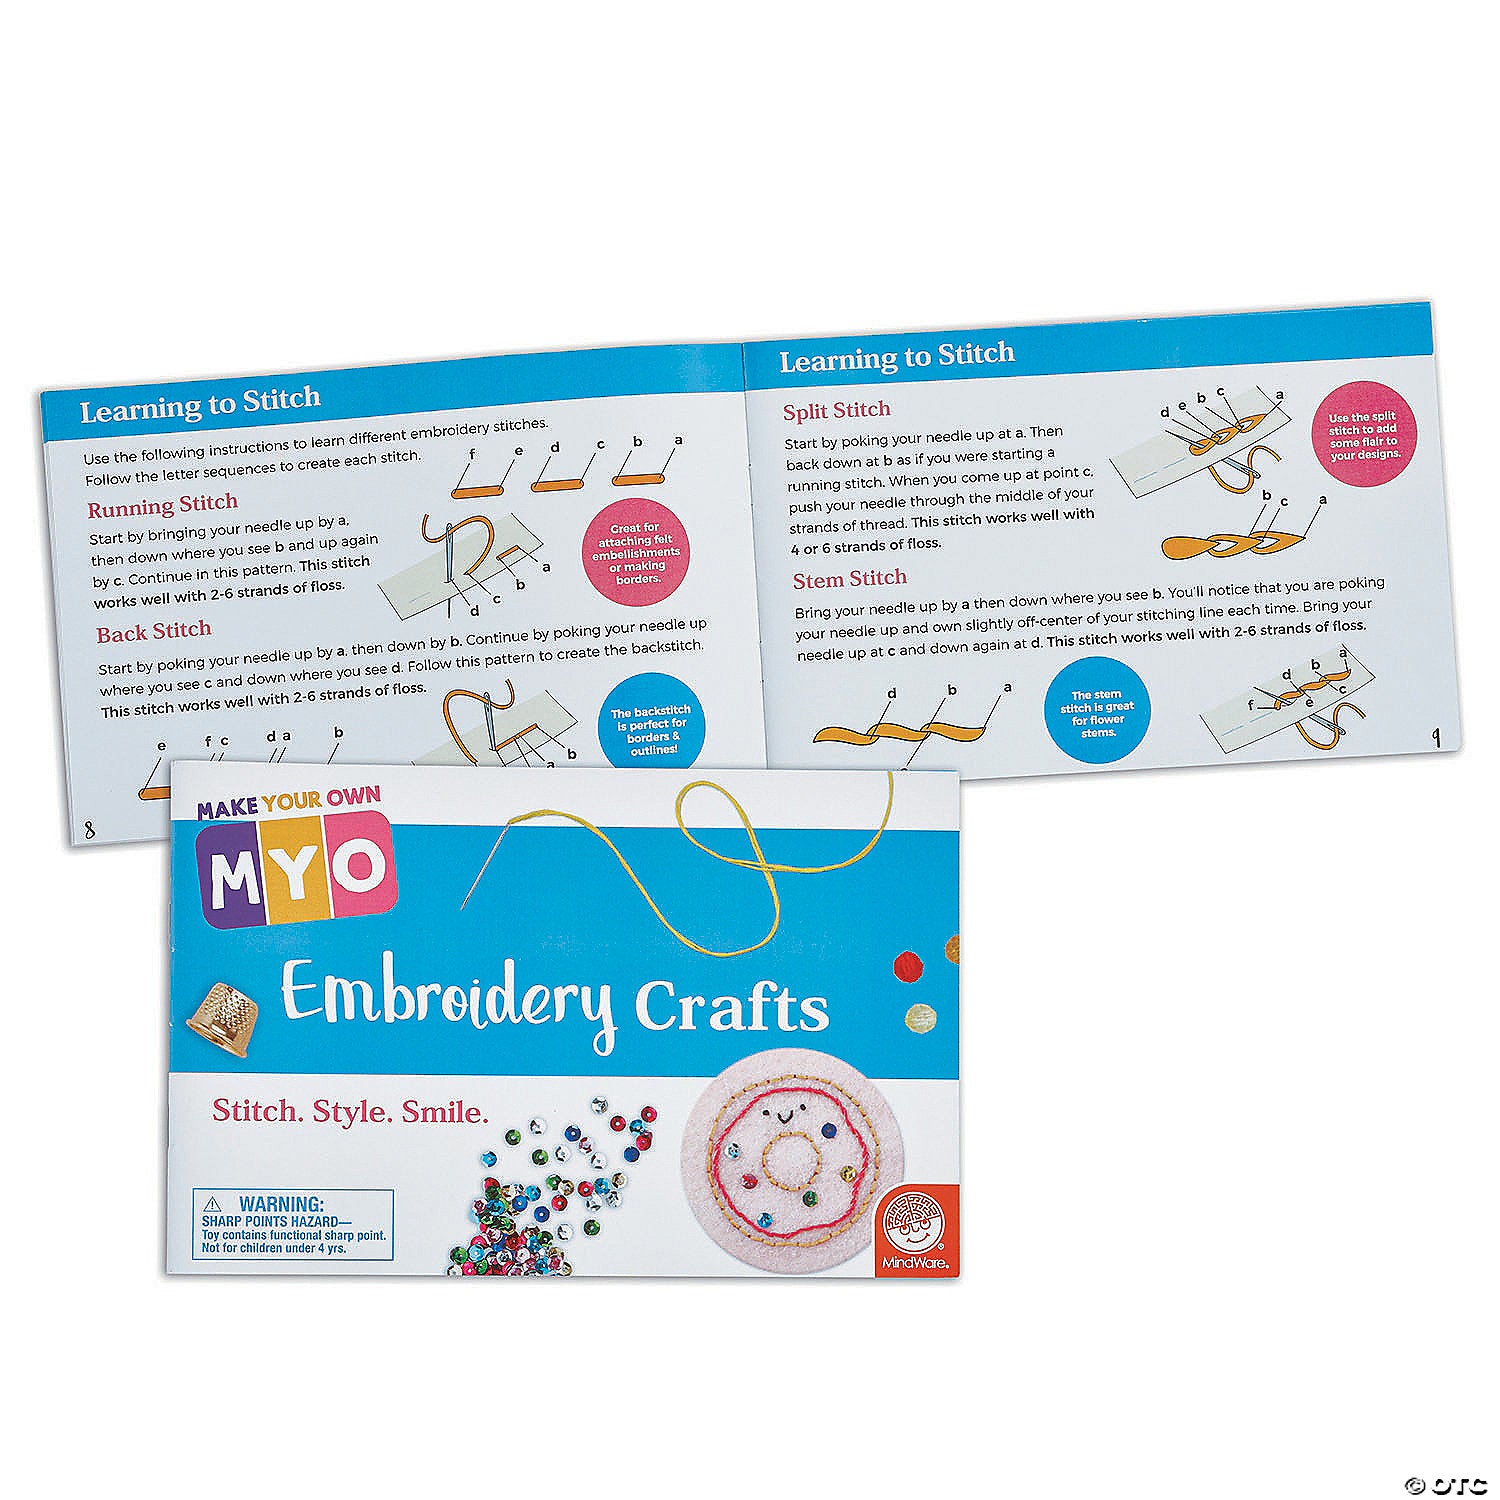 Embroidery Crafts    